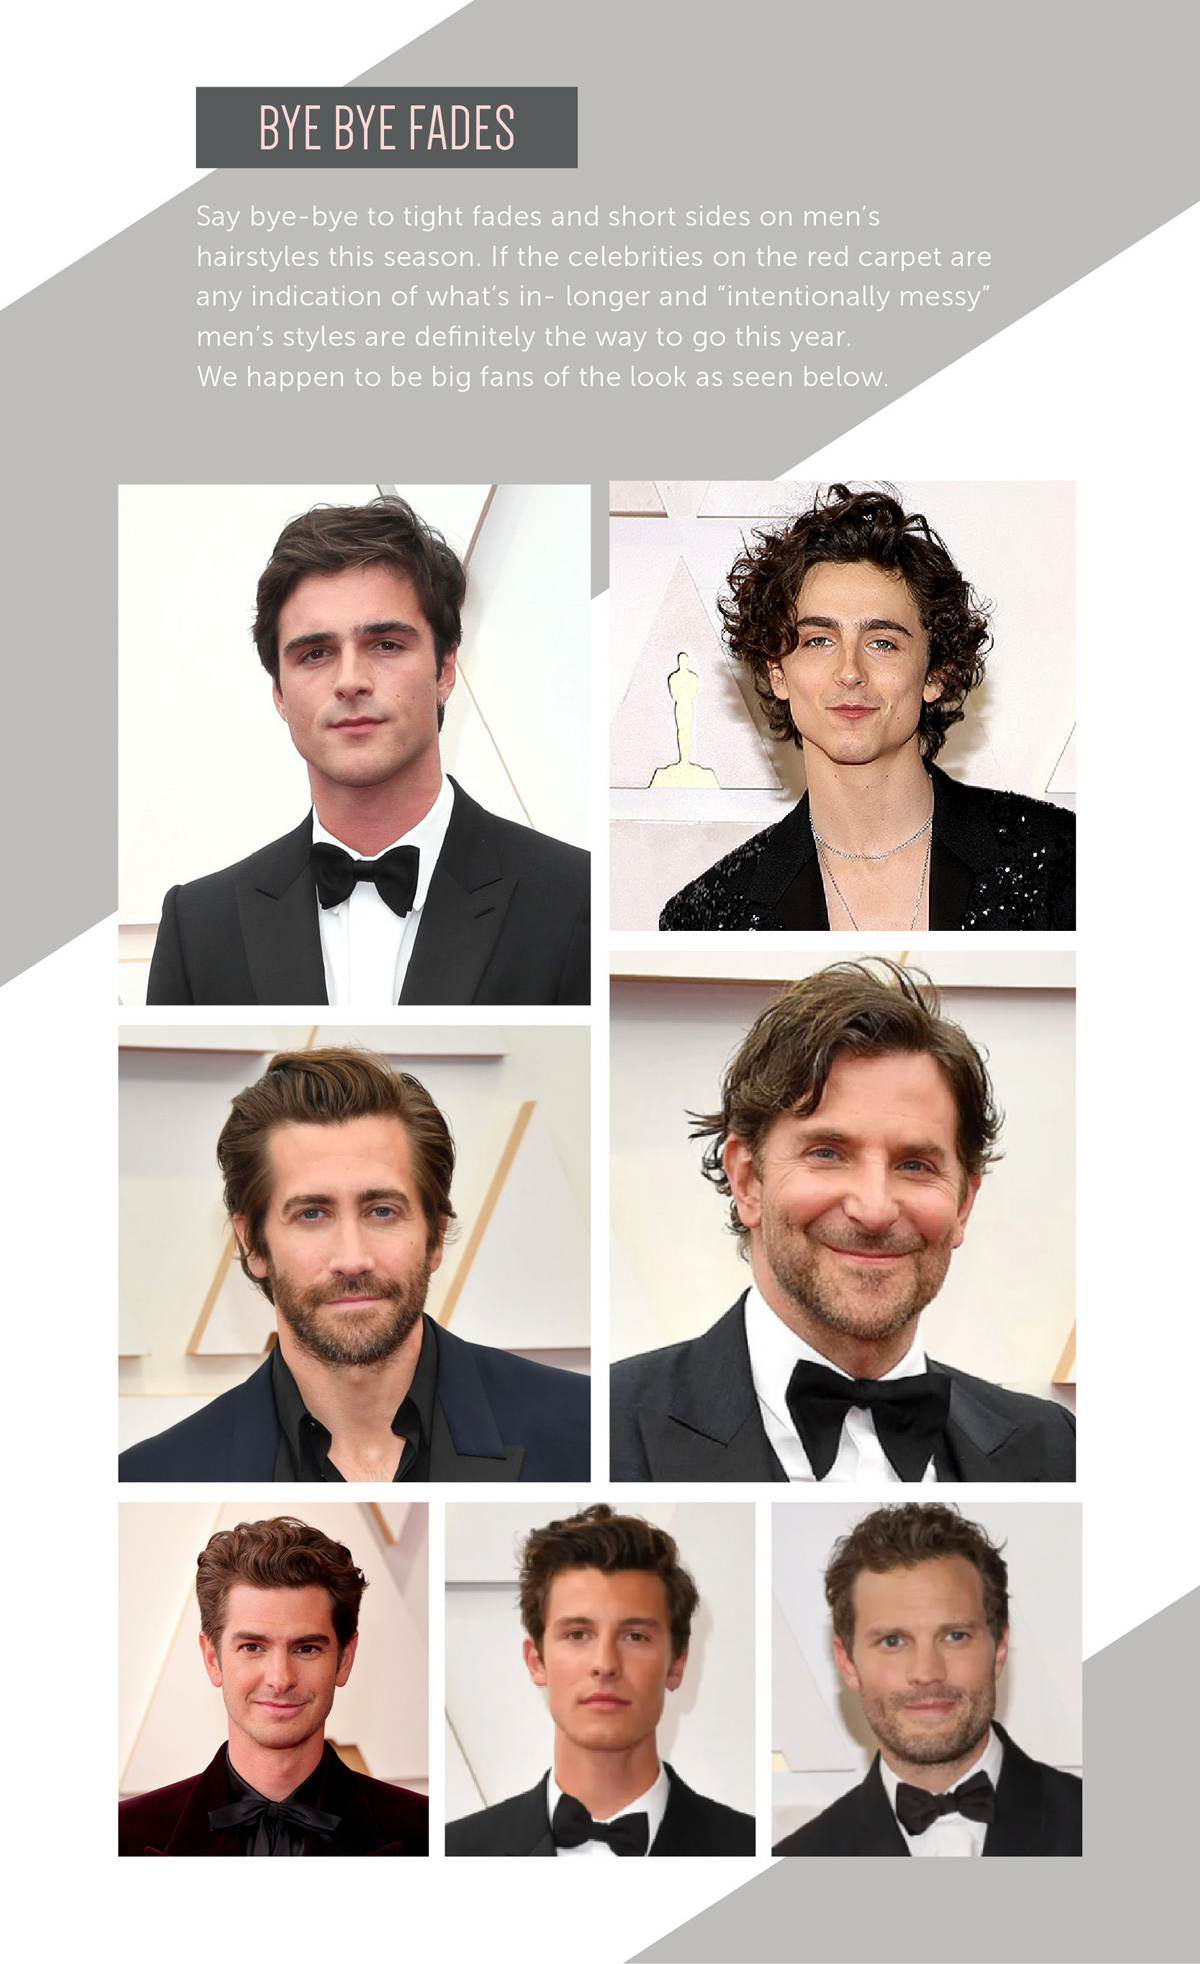  Bye Bye Fades Say bye-bye to tight fades and short sides on men's hairstyles this season. If the celebrities on the red carpet are any indication of what’s in- longer and “intentionally messy” men's styles are definitely the way to go this year. We happen to be big fans of the look as seen below.